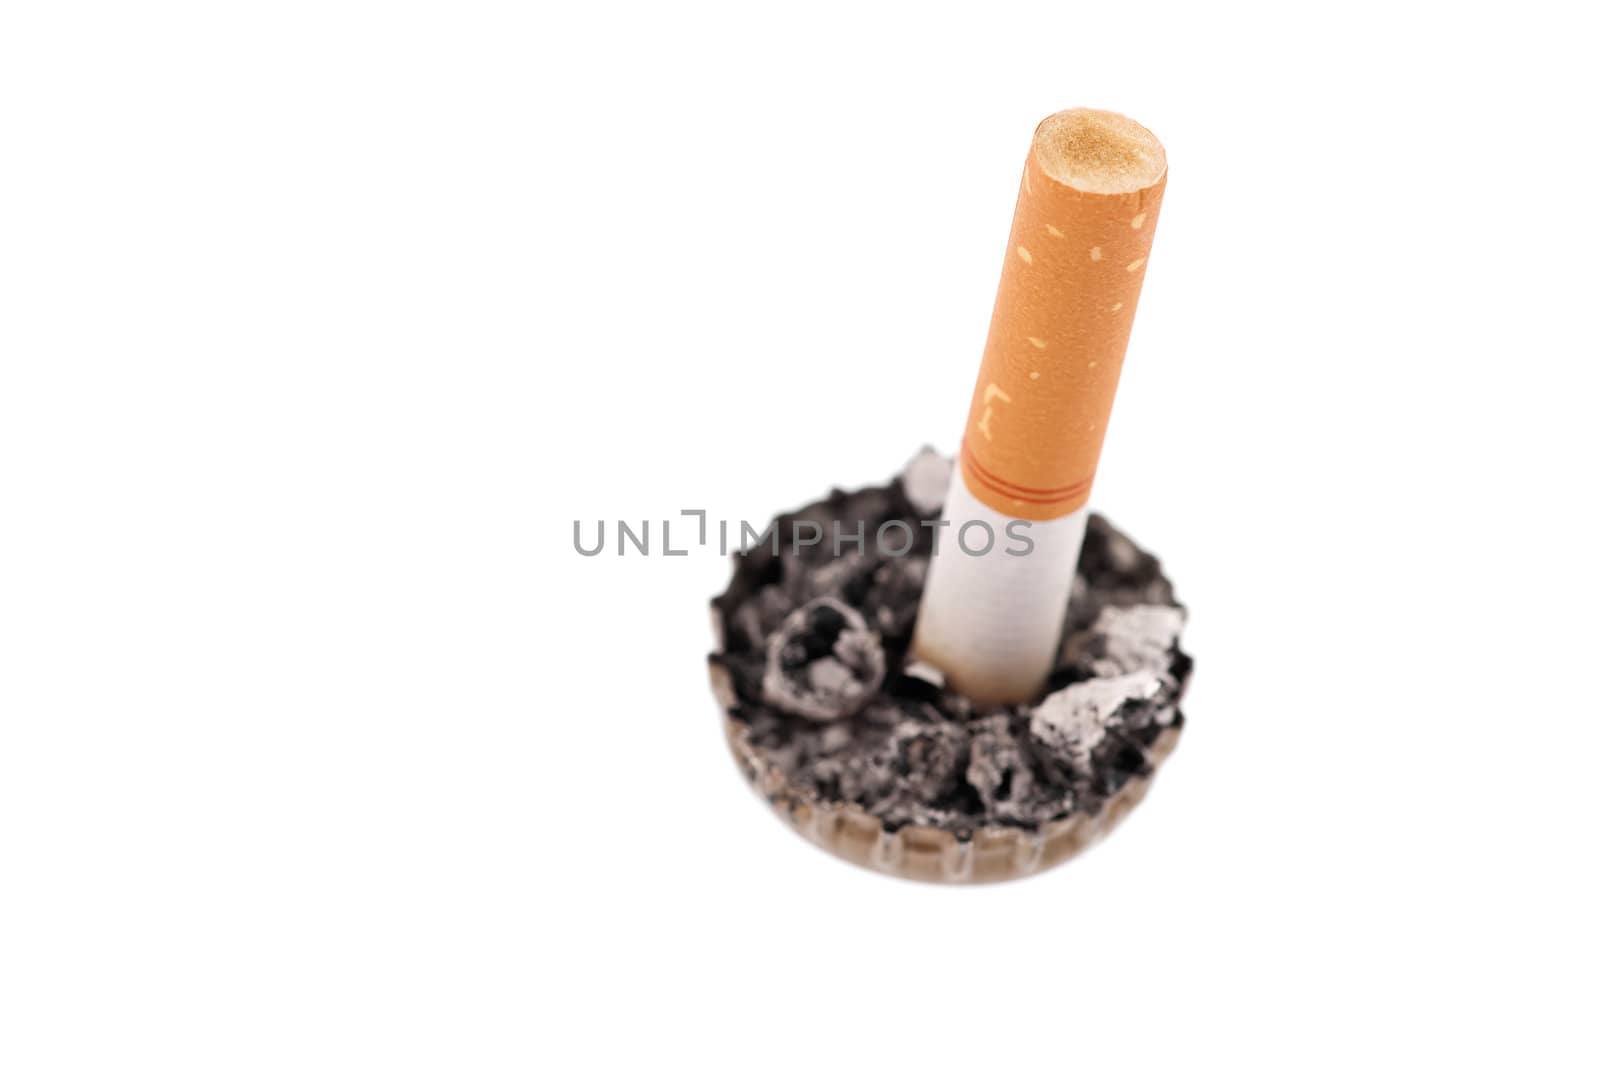 cigarette butt in a bottle cap on white background by Marcus